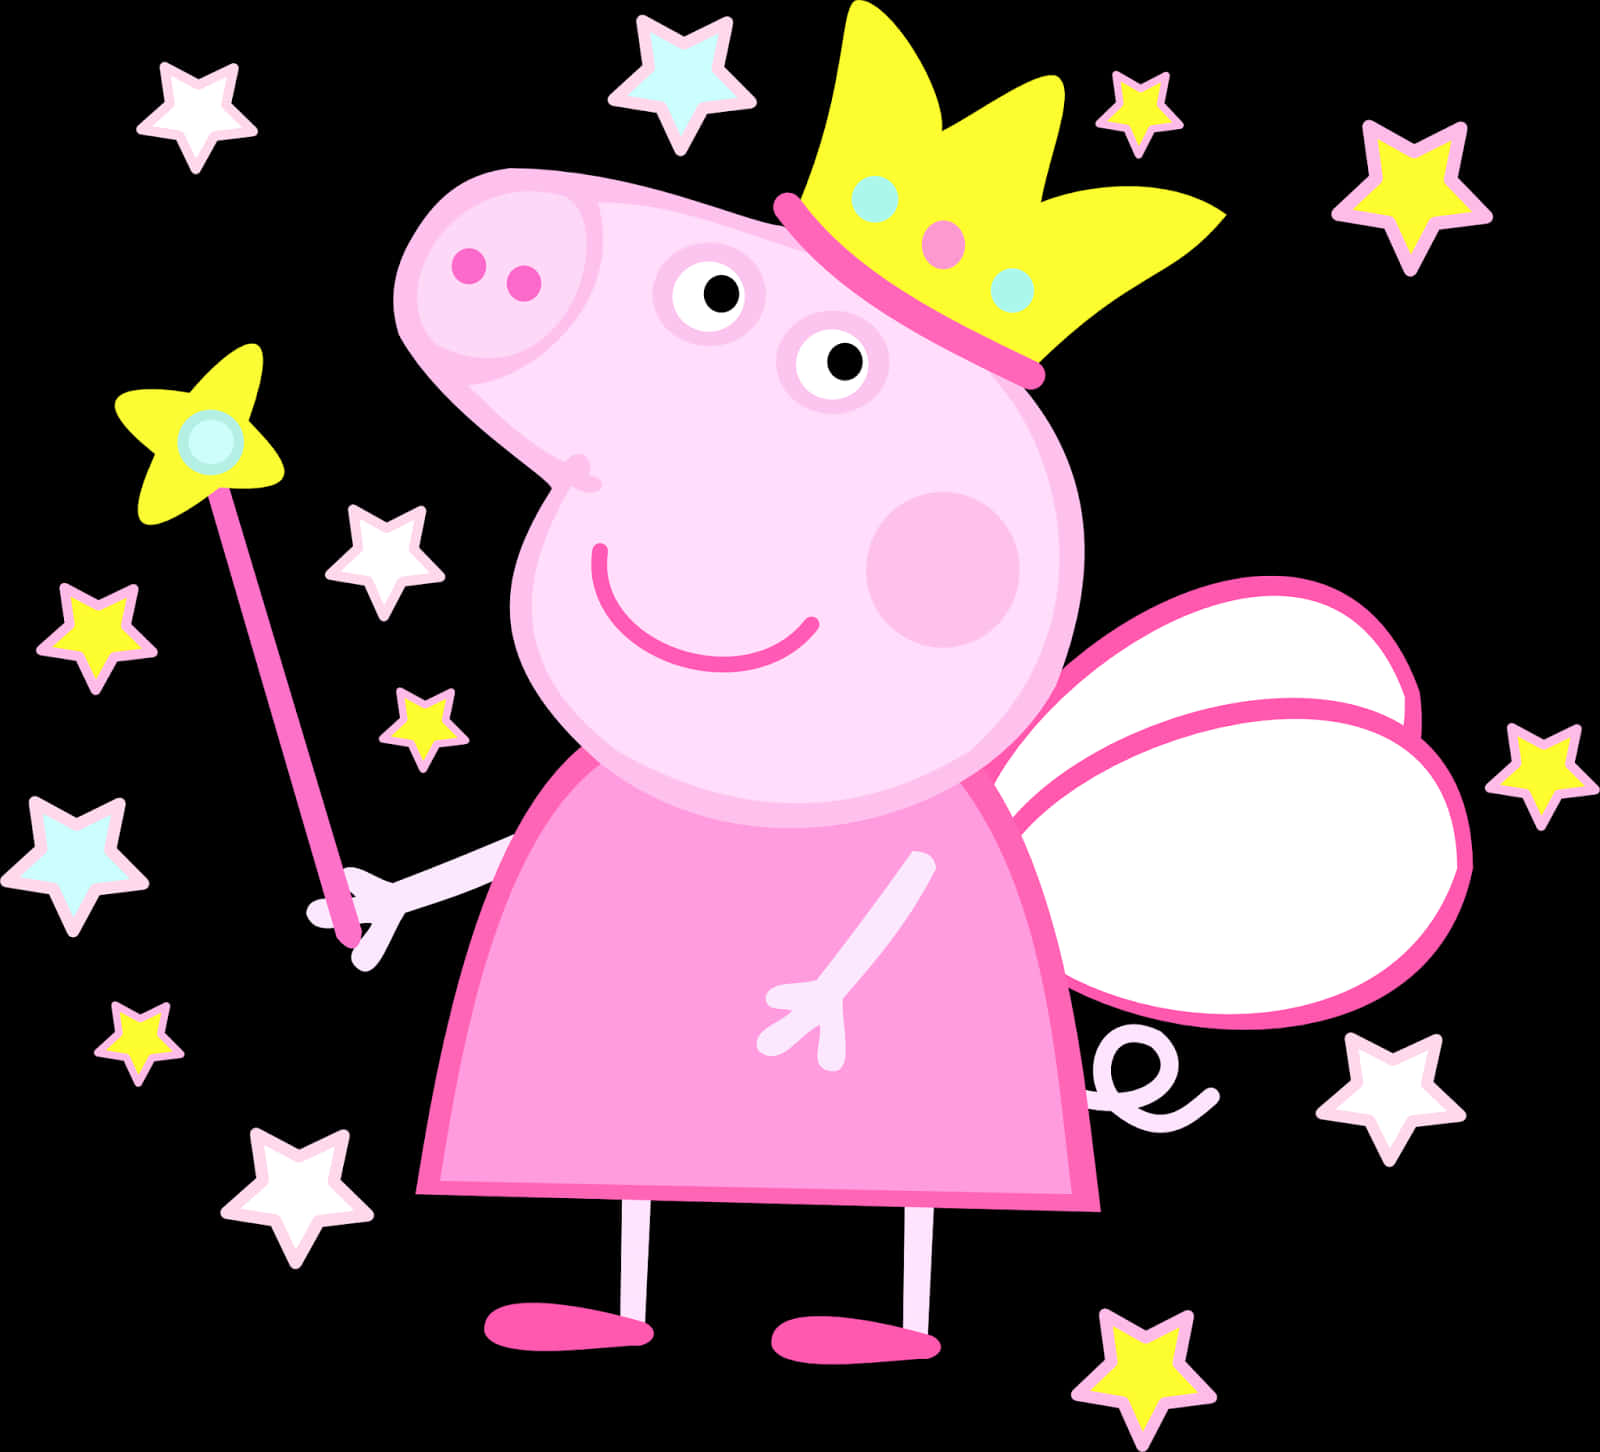 A Cartoon Pig With Wings And Crown Holding A Magic Wand